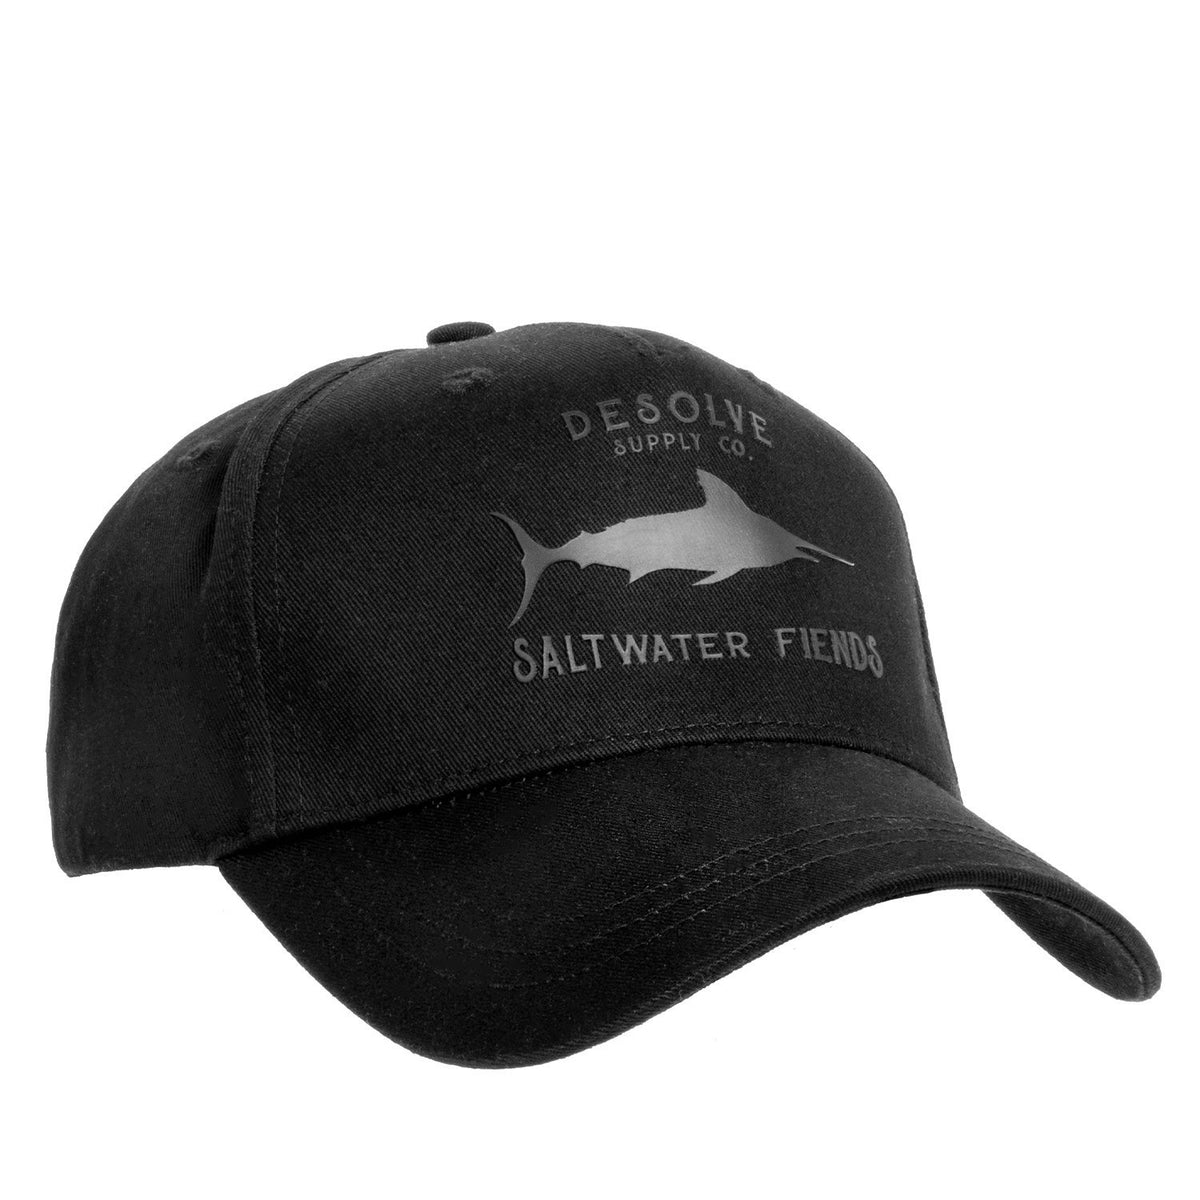 Desolve Supply Co, Fiends Cap, 100% Poly Cotton, One Size Fits Most, Fishing Hat, Mens - Desolve Supply Co.